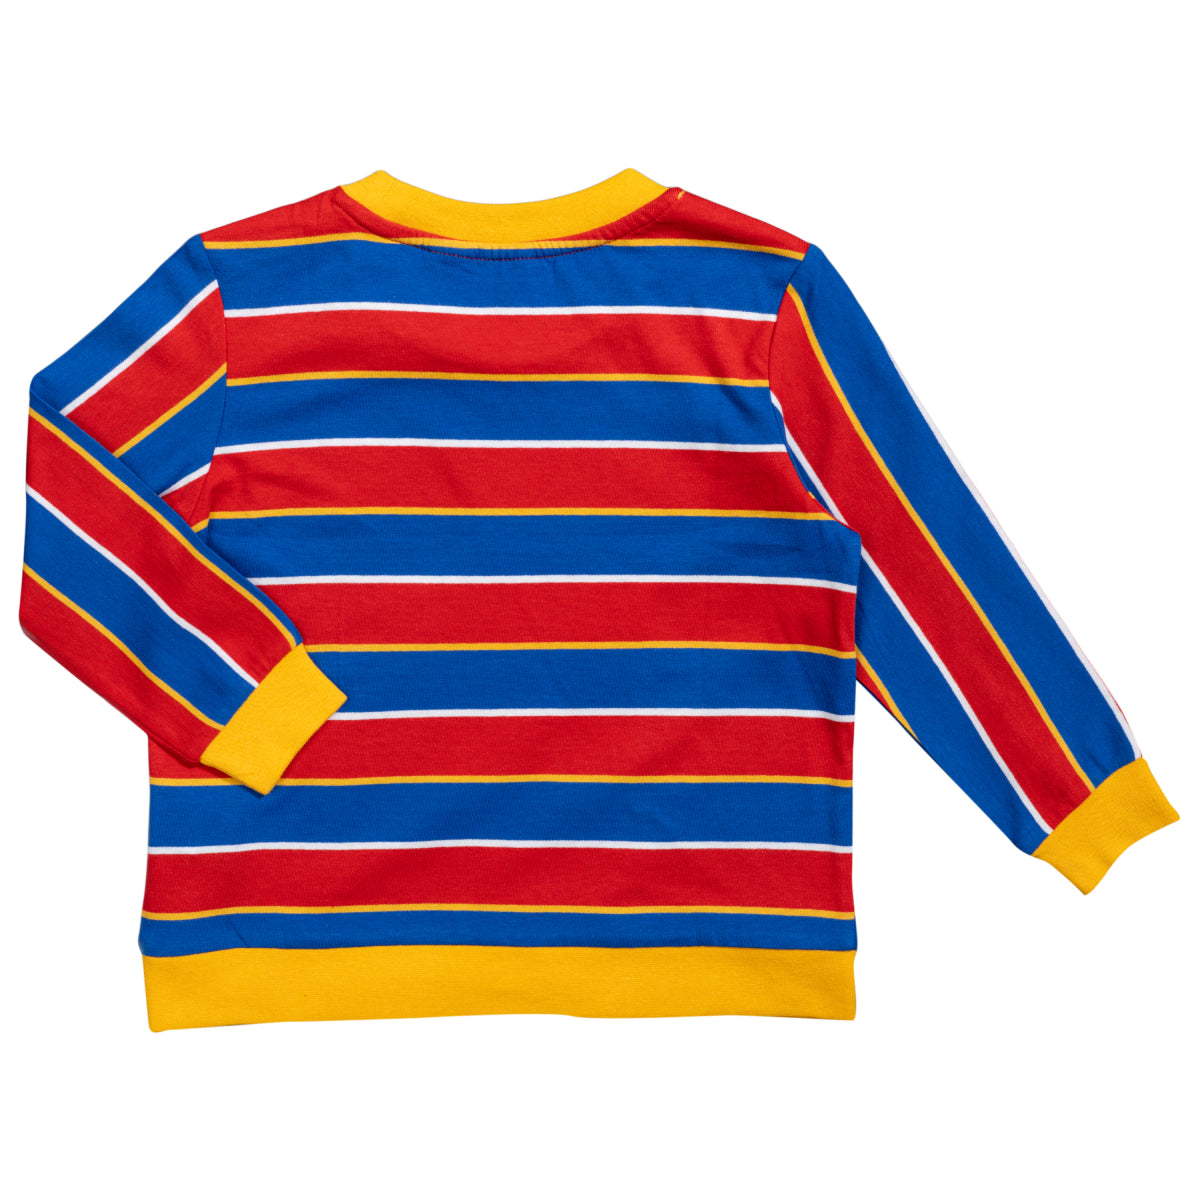 Bert and Ernie Kids Long Sleeve T-Shirts Perfect for Halloween Costume Cosplay Back